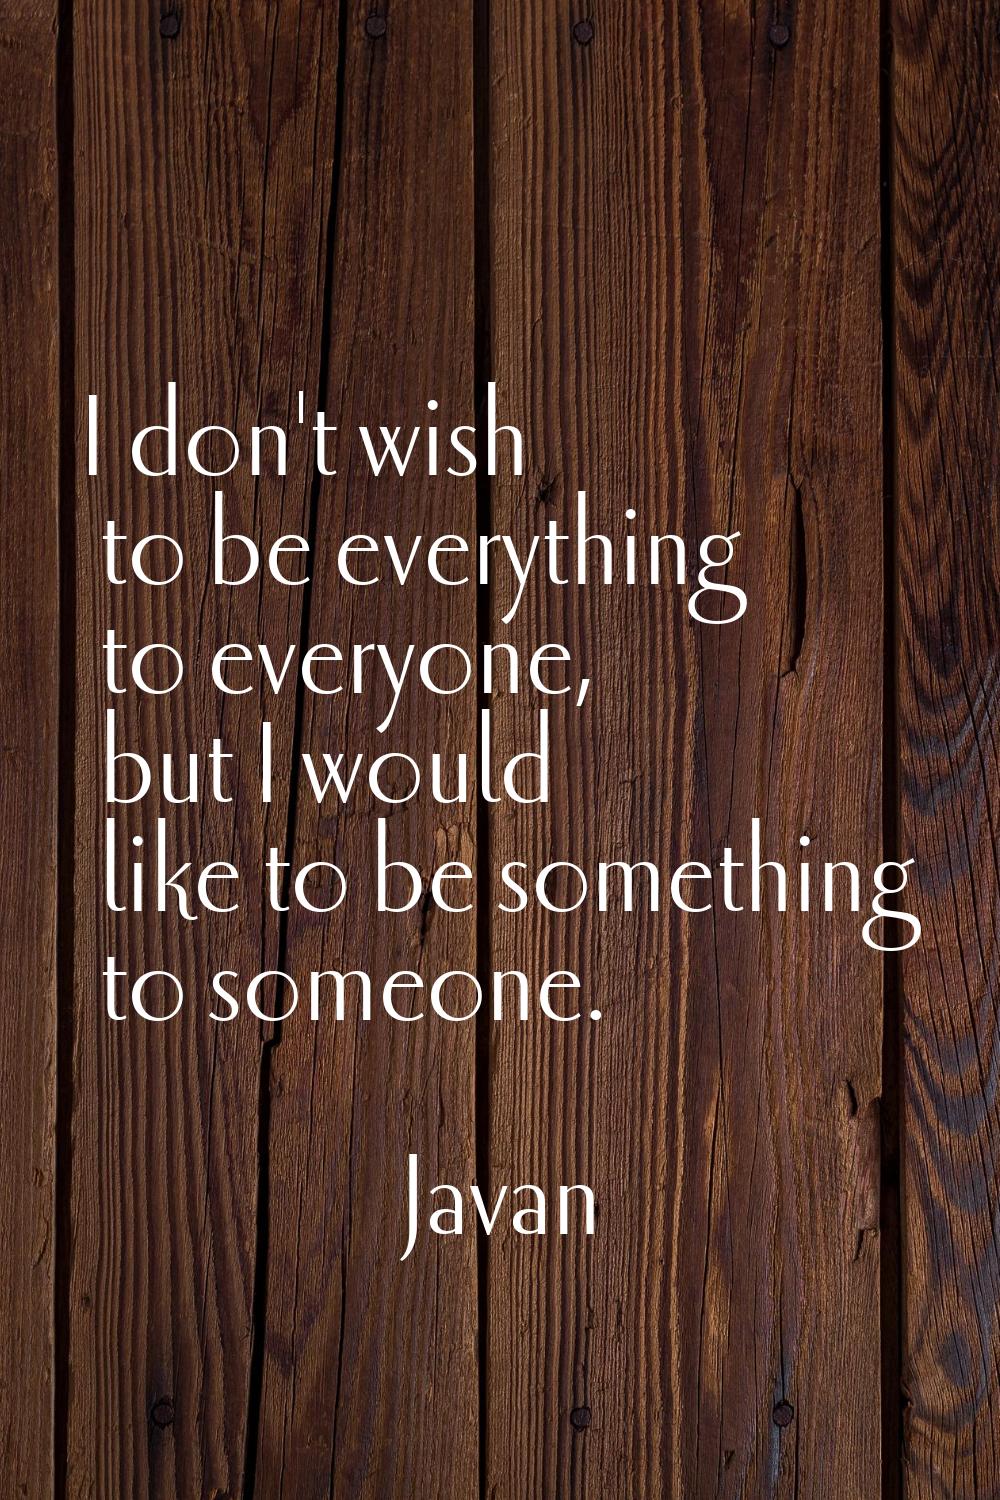 I don't wish to be everything to everyone, but I would like to be something to someone.